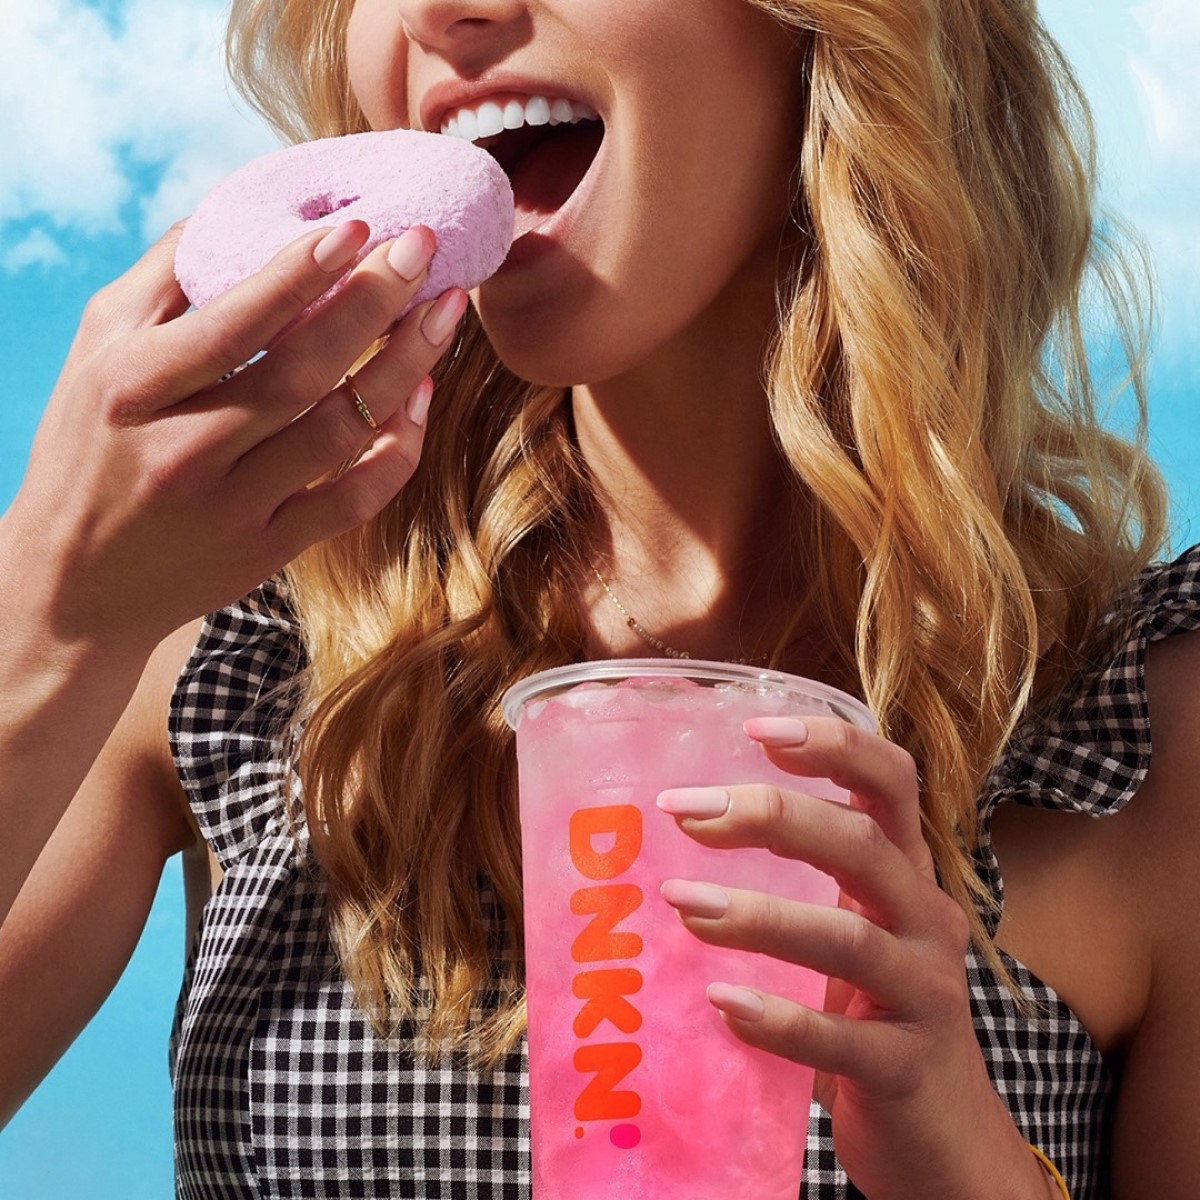 woman holding cup of strawberry flavored lemonade dunkin refresher while biting into donut